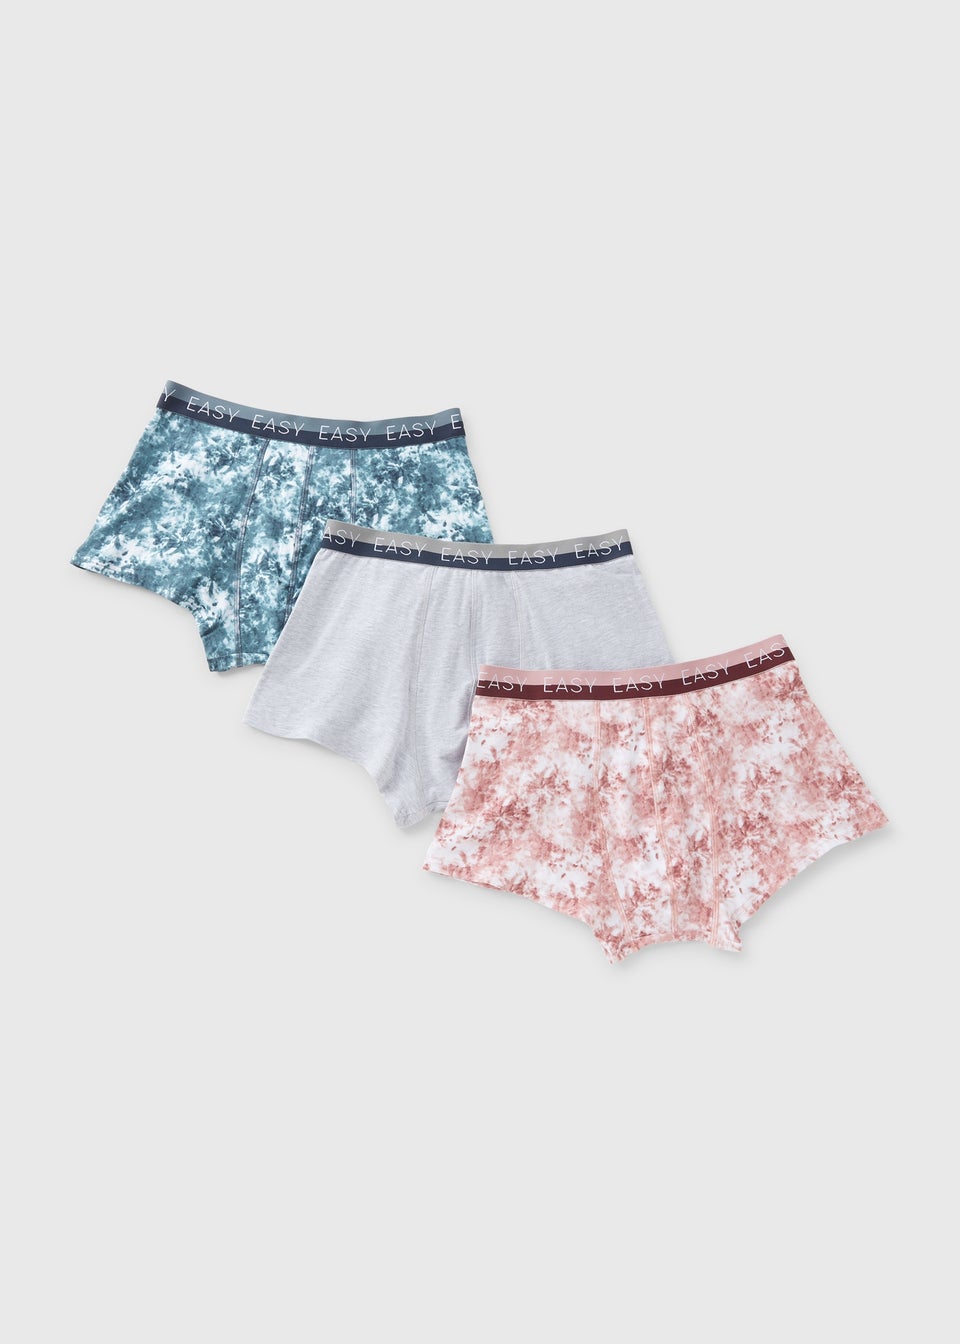 3 Pack Tie Dye Hipster Boxers